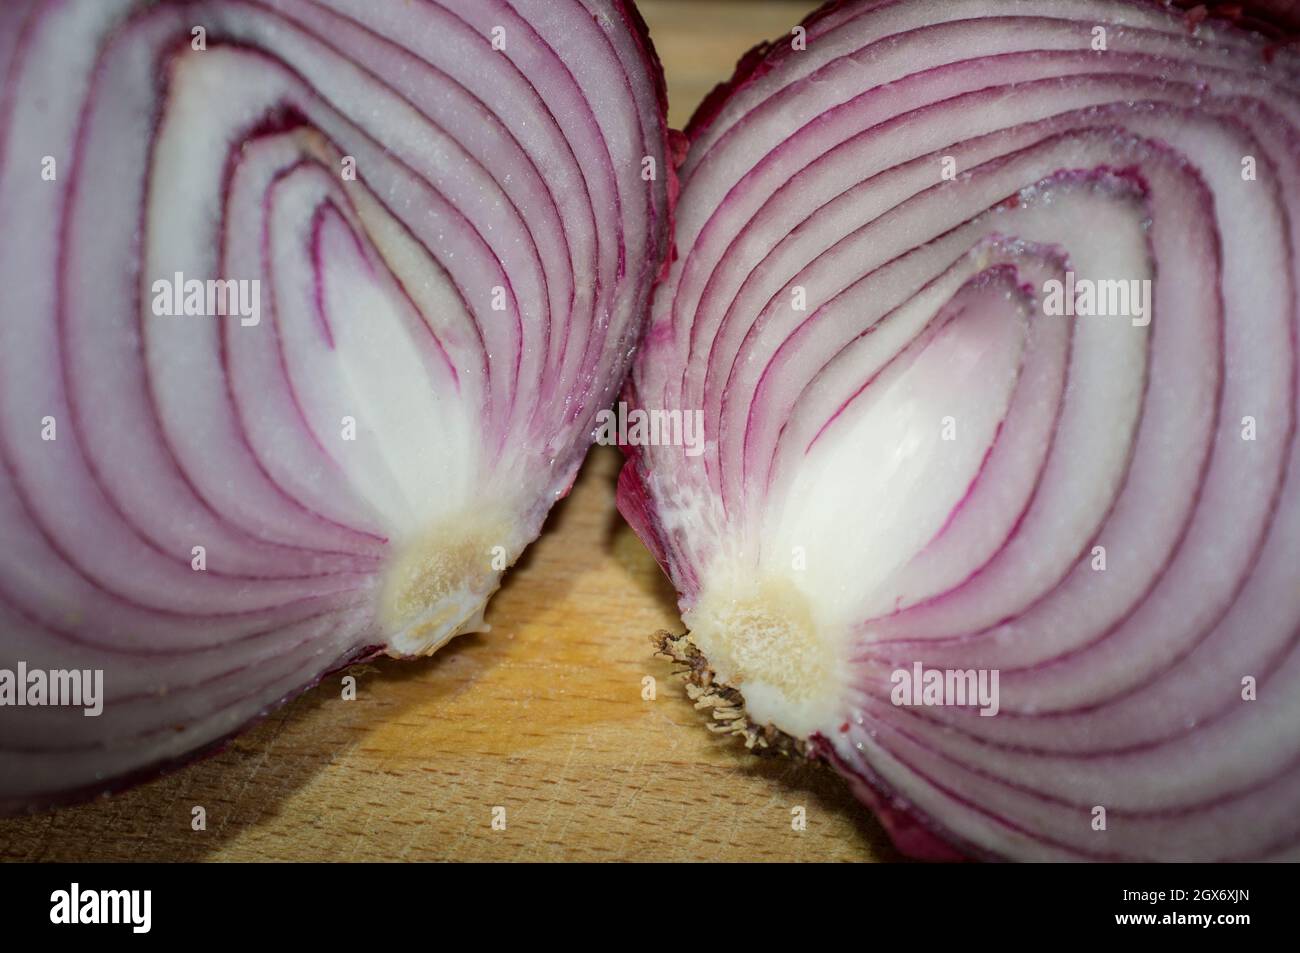 Cross sections of raw red onions. Closeup over wooden cutting board Stock Photo